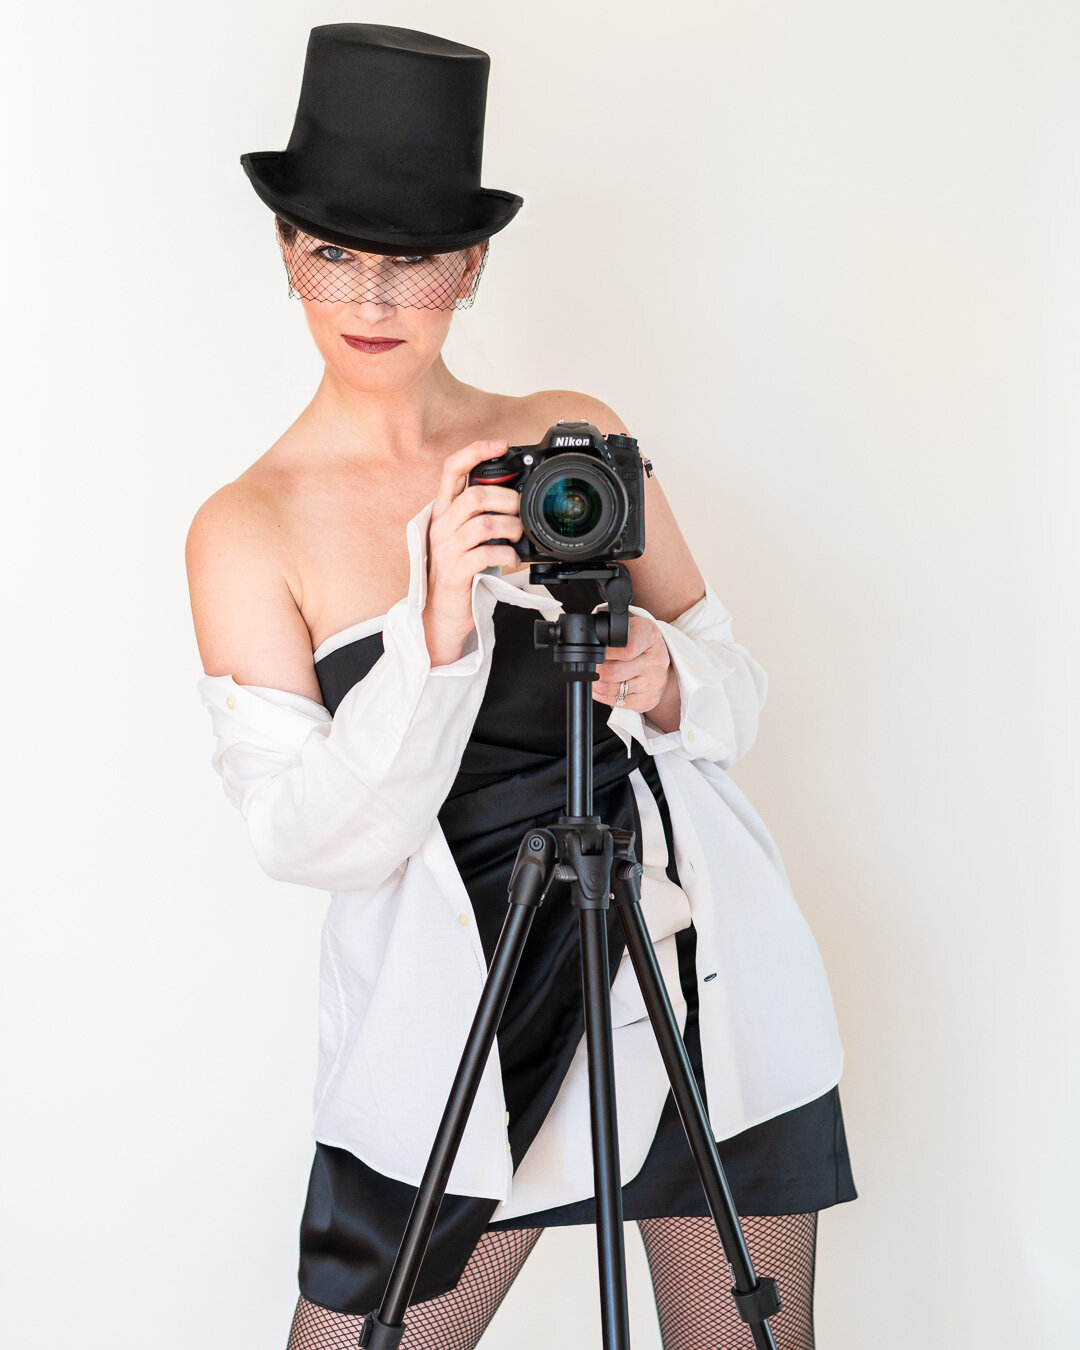 LET'S GO GIRLS.

Channeled my inner @ShaniaTwain for this concept while taking @alexeischeid 's Concept to Creation class through @clickphotoschool.  While Shania has her microphone and her voice, I have my camera and tripod and I'm using it to say: 